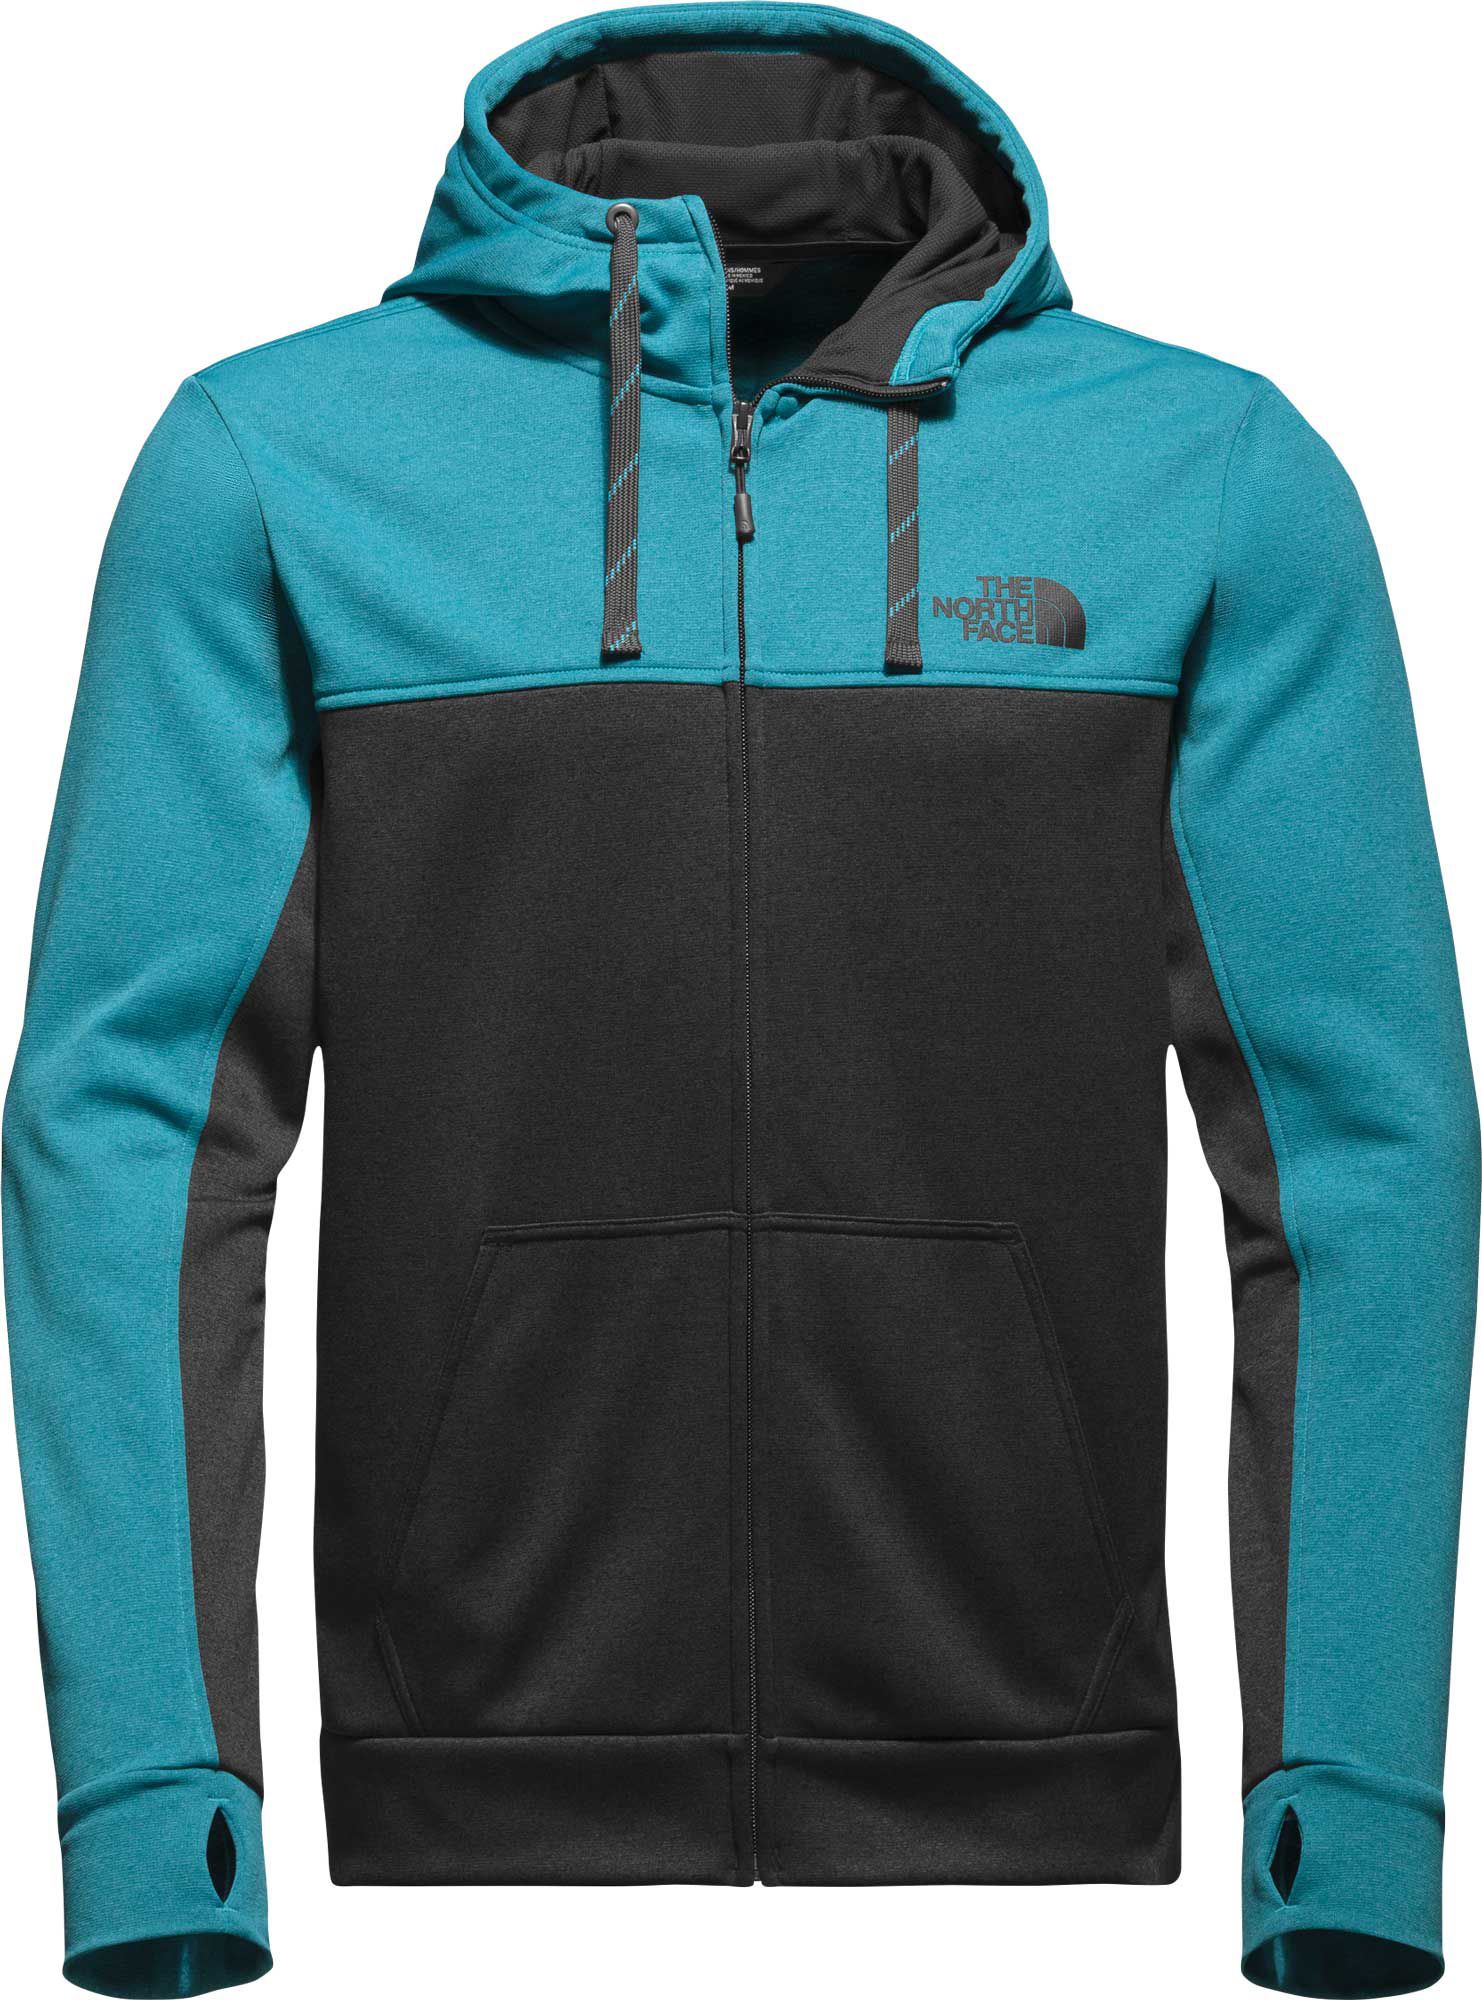 The North Face Men's Hoodies | DICK'S Sporting Goods